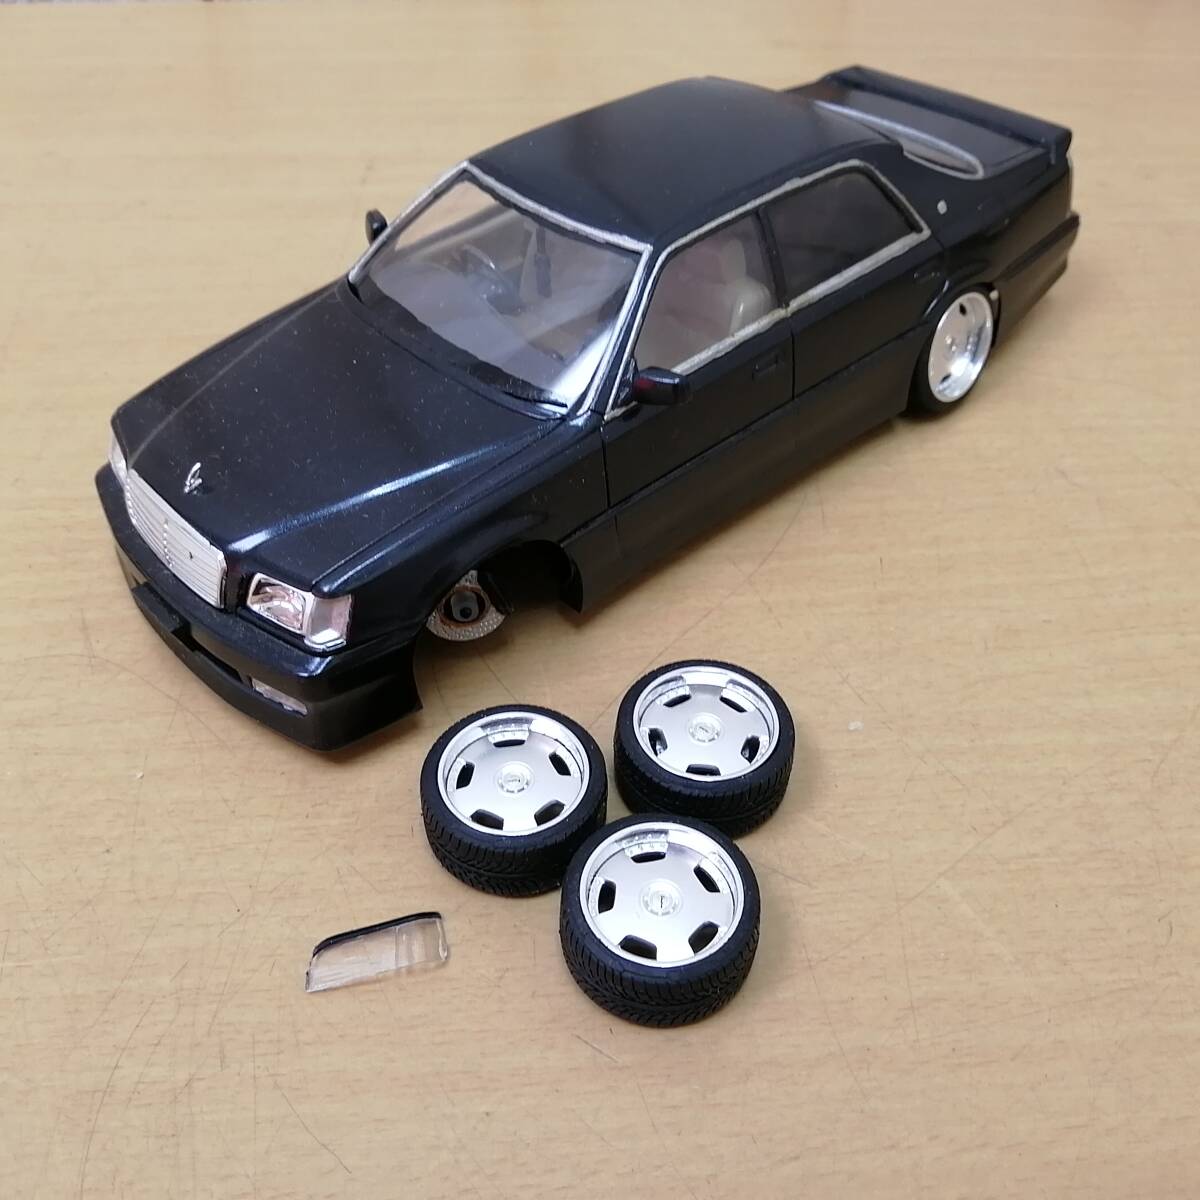 024032130 plastic model final product defect have Toyota Crown Majesta TOYOTA CROWN MAJESTA black total length approximately 21cm